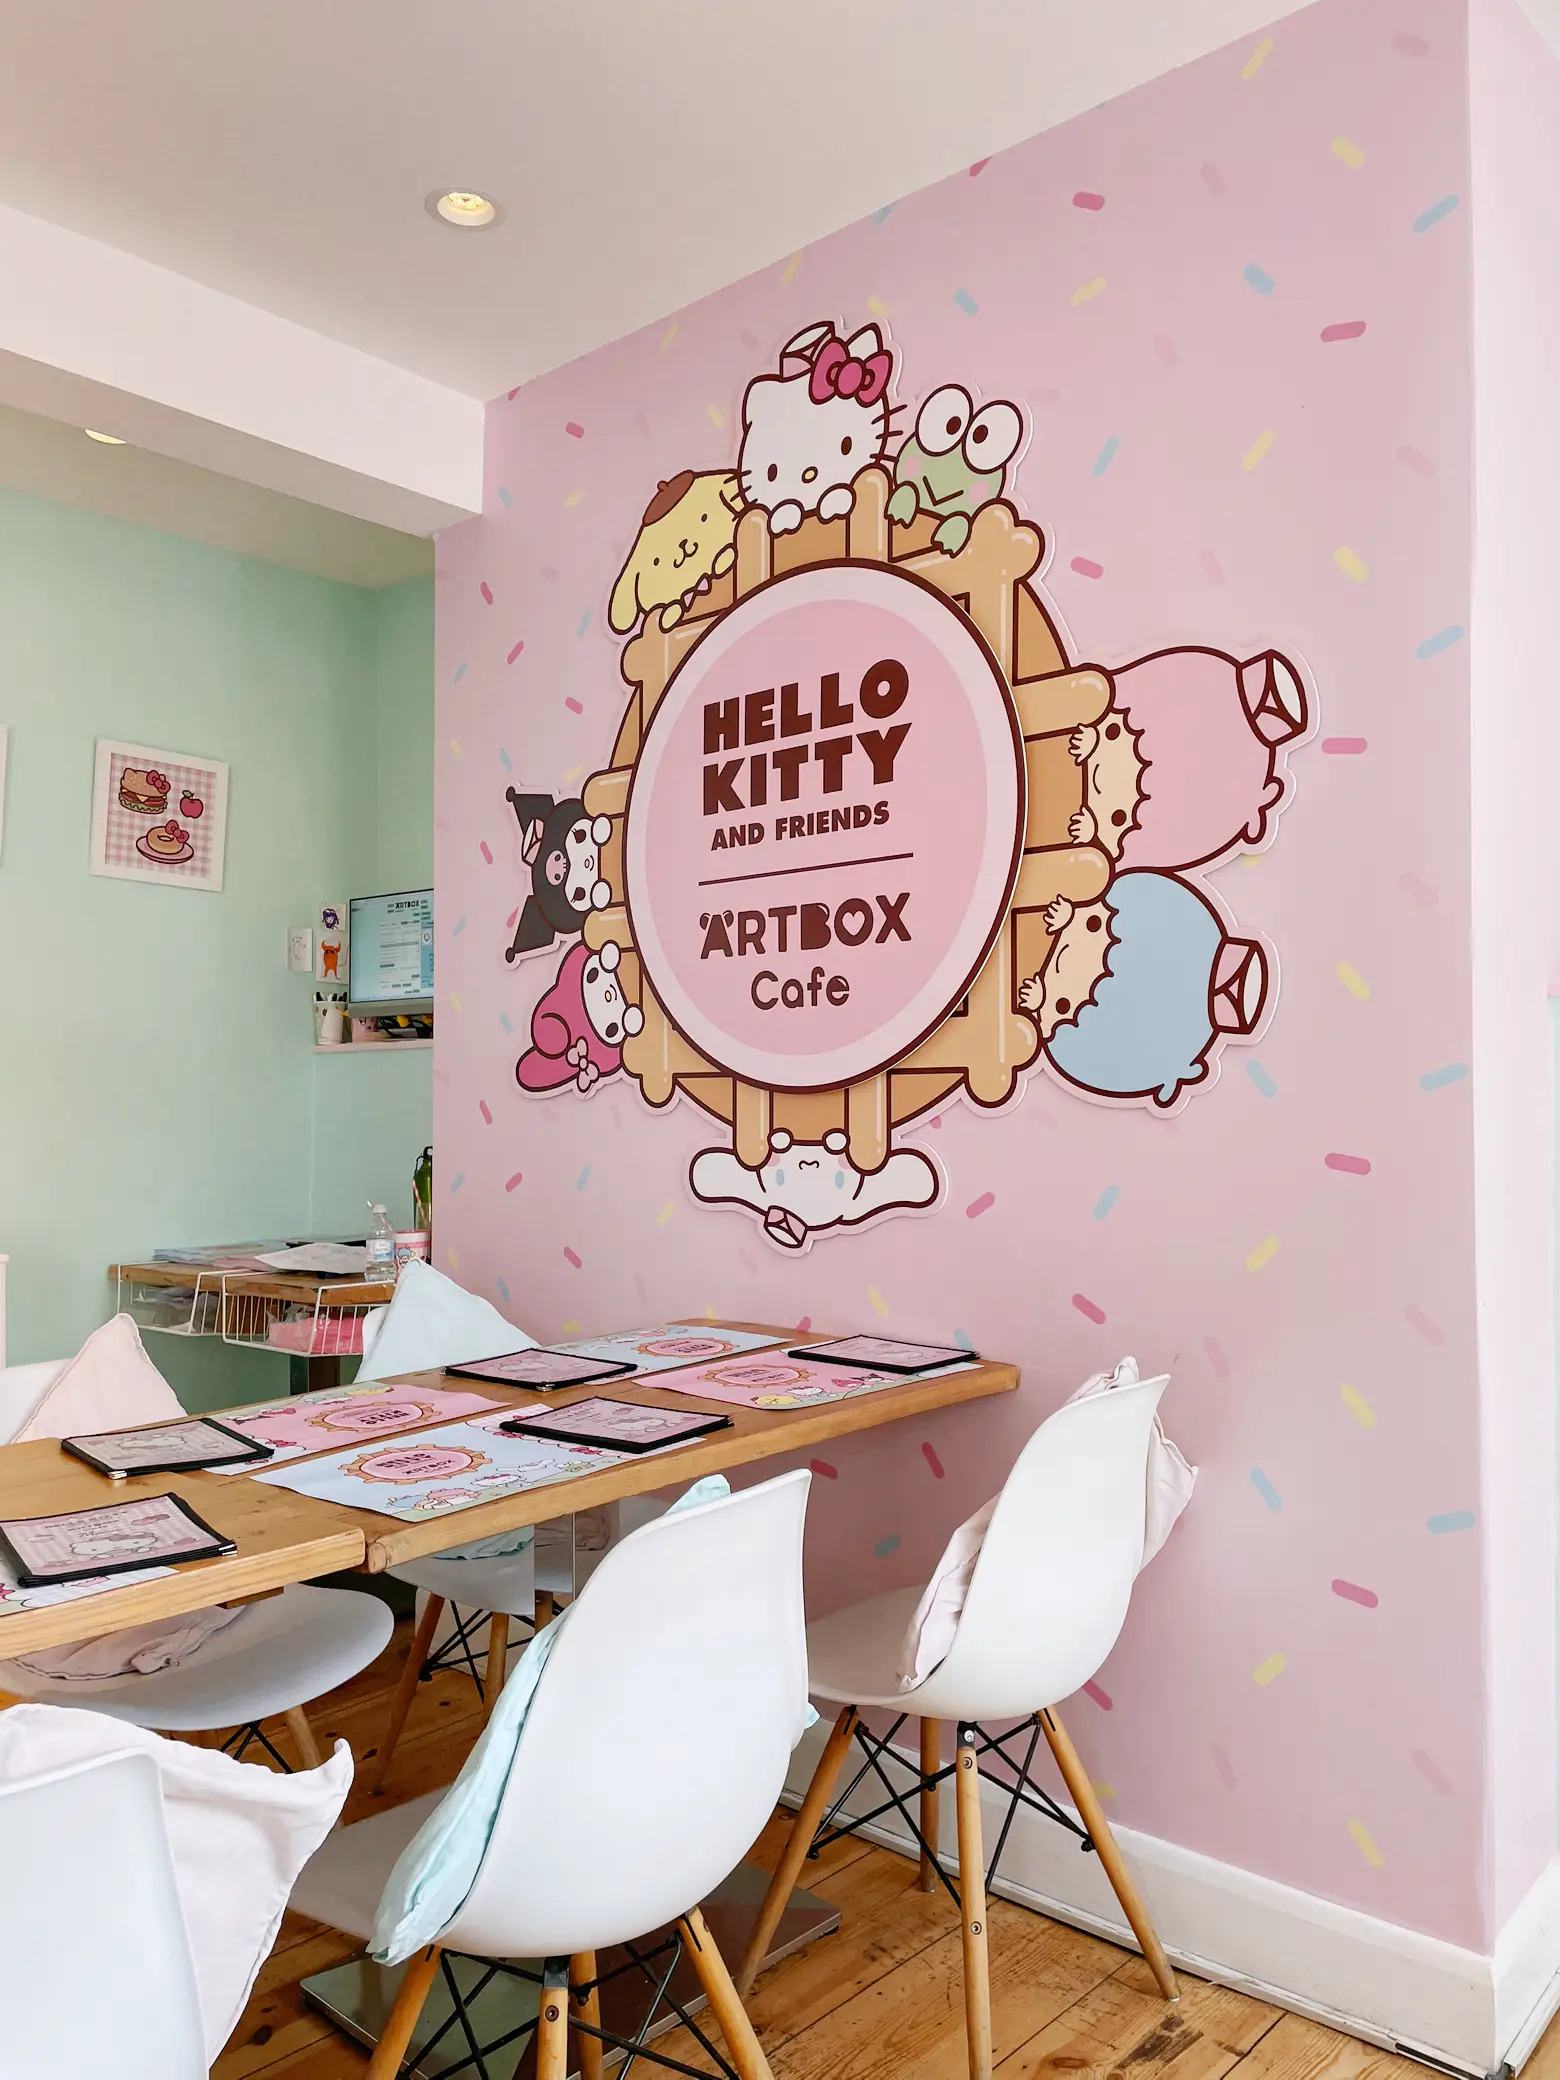 When I saw there was a new hello kitty cafe in CDMX I knew I had